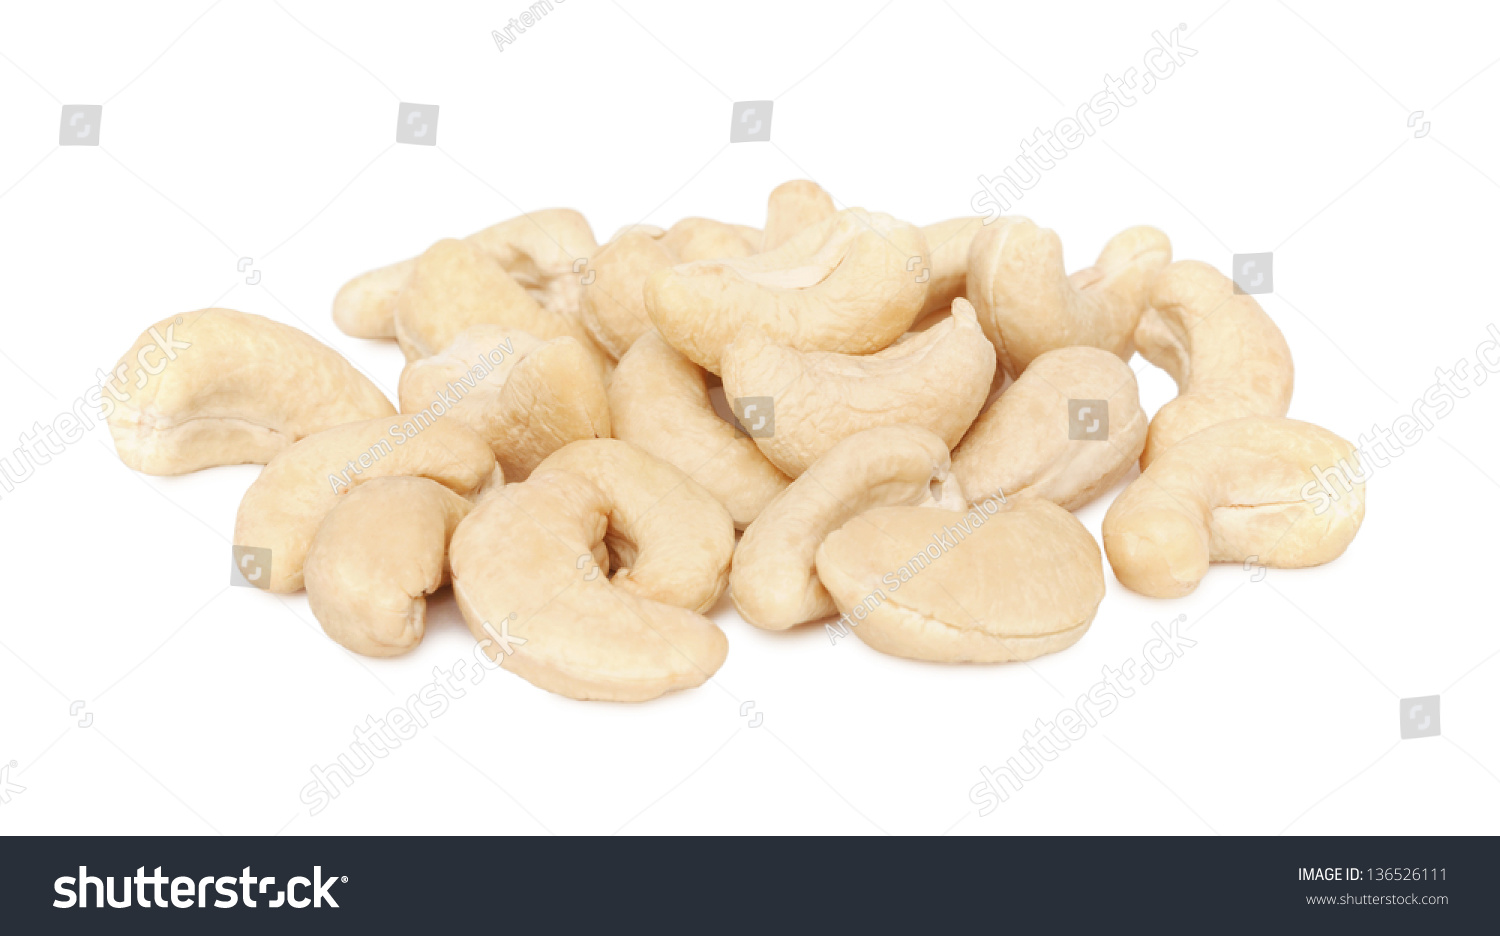 Pile of cashew nuts isolated on white background #136526111